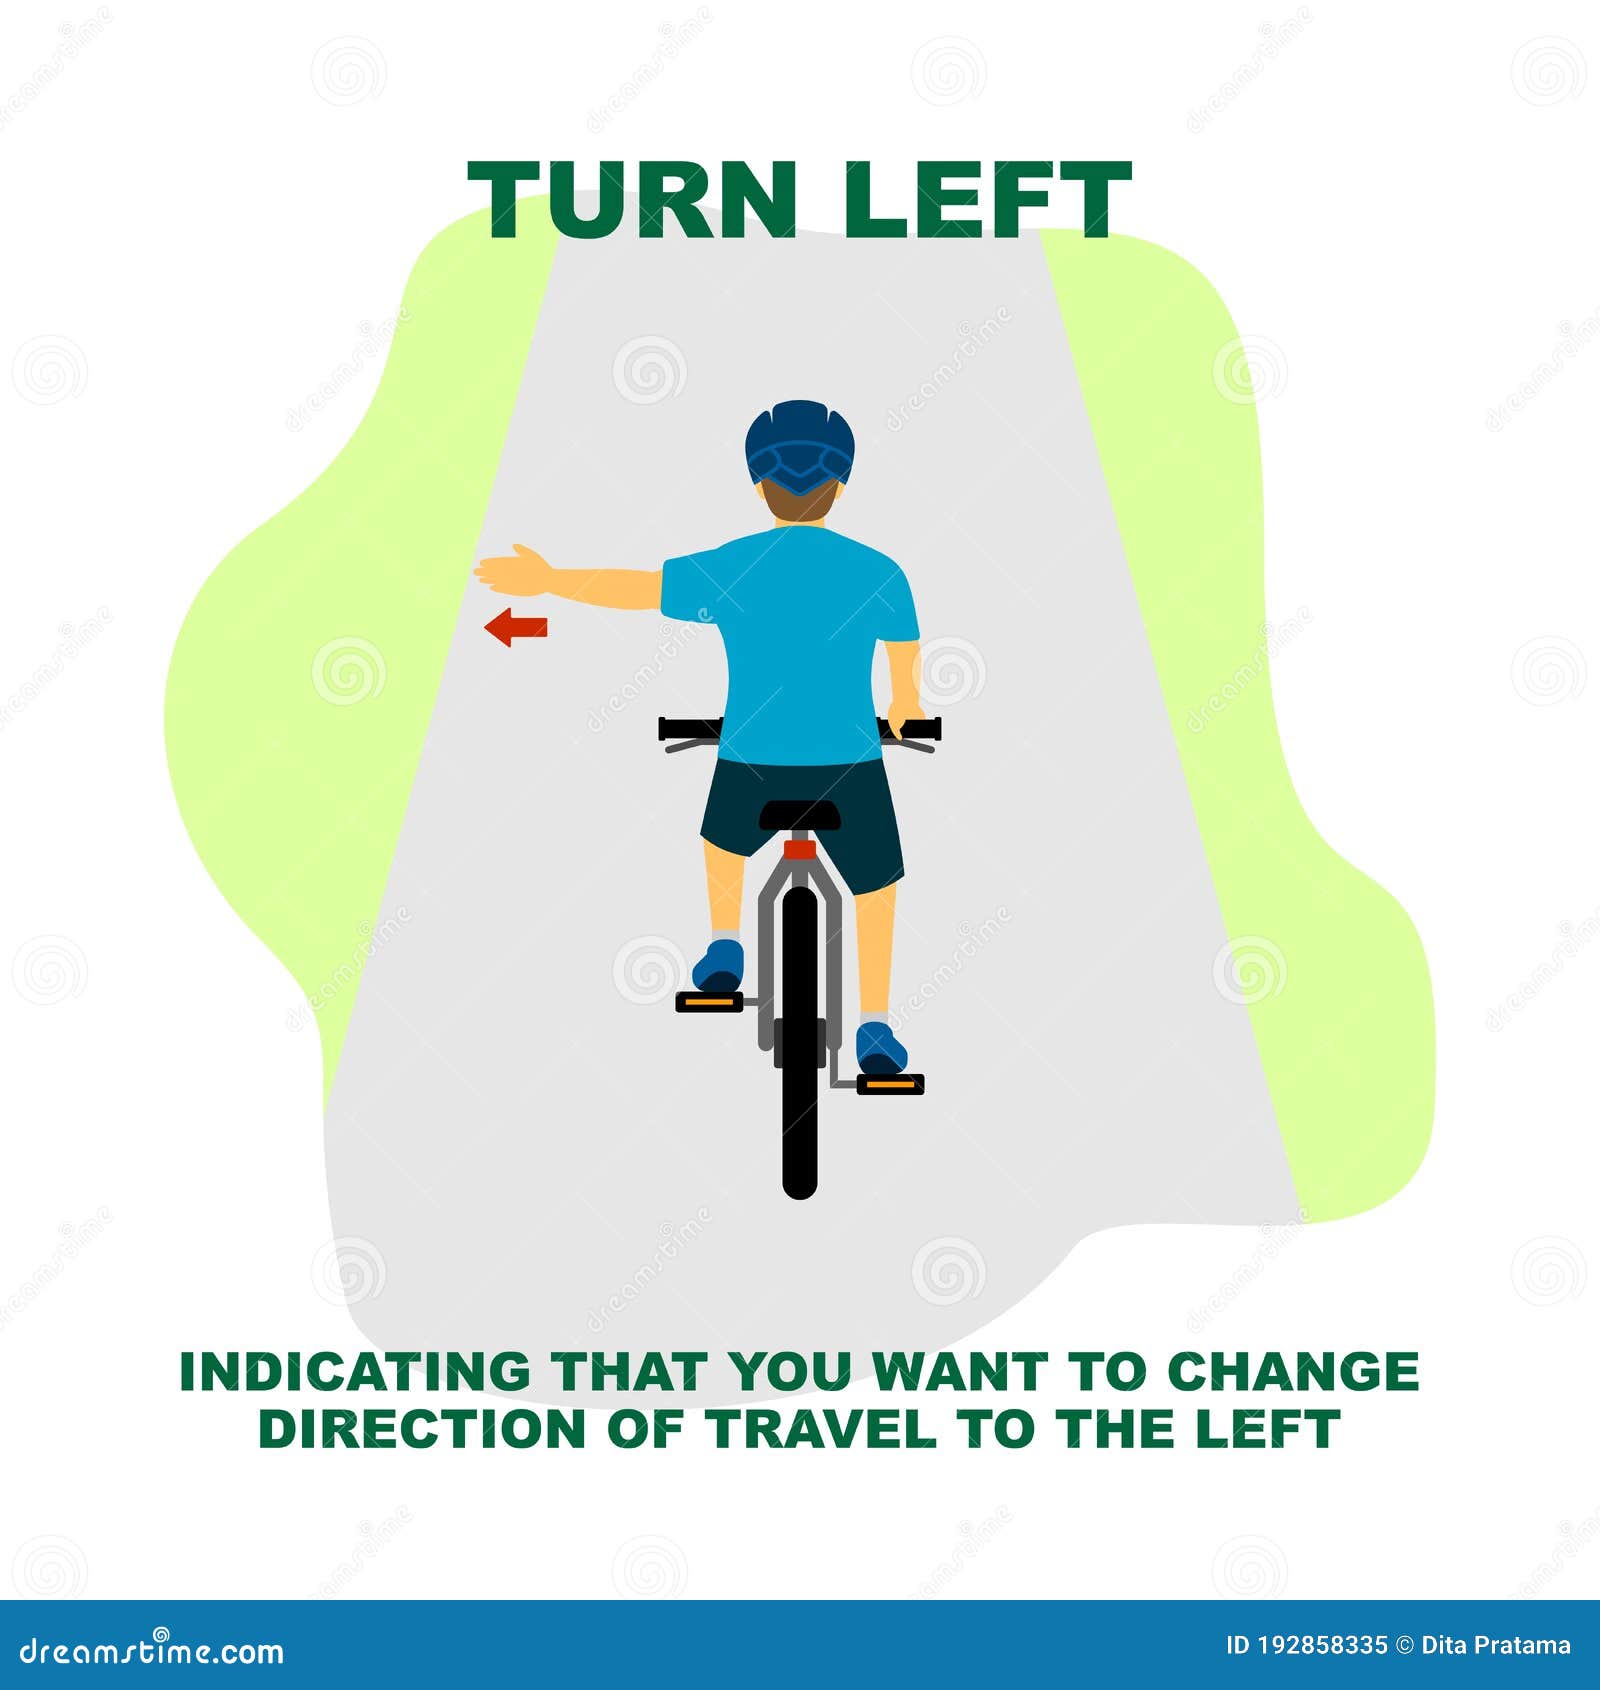 cycling rules for traffic safety, turn left bicycle hand signals.